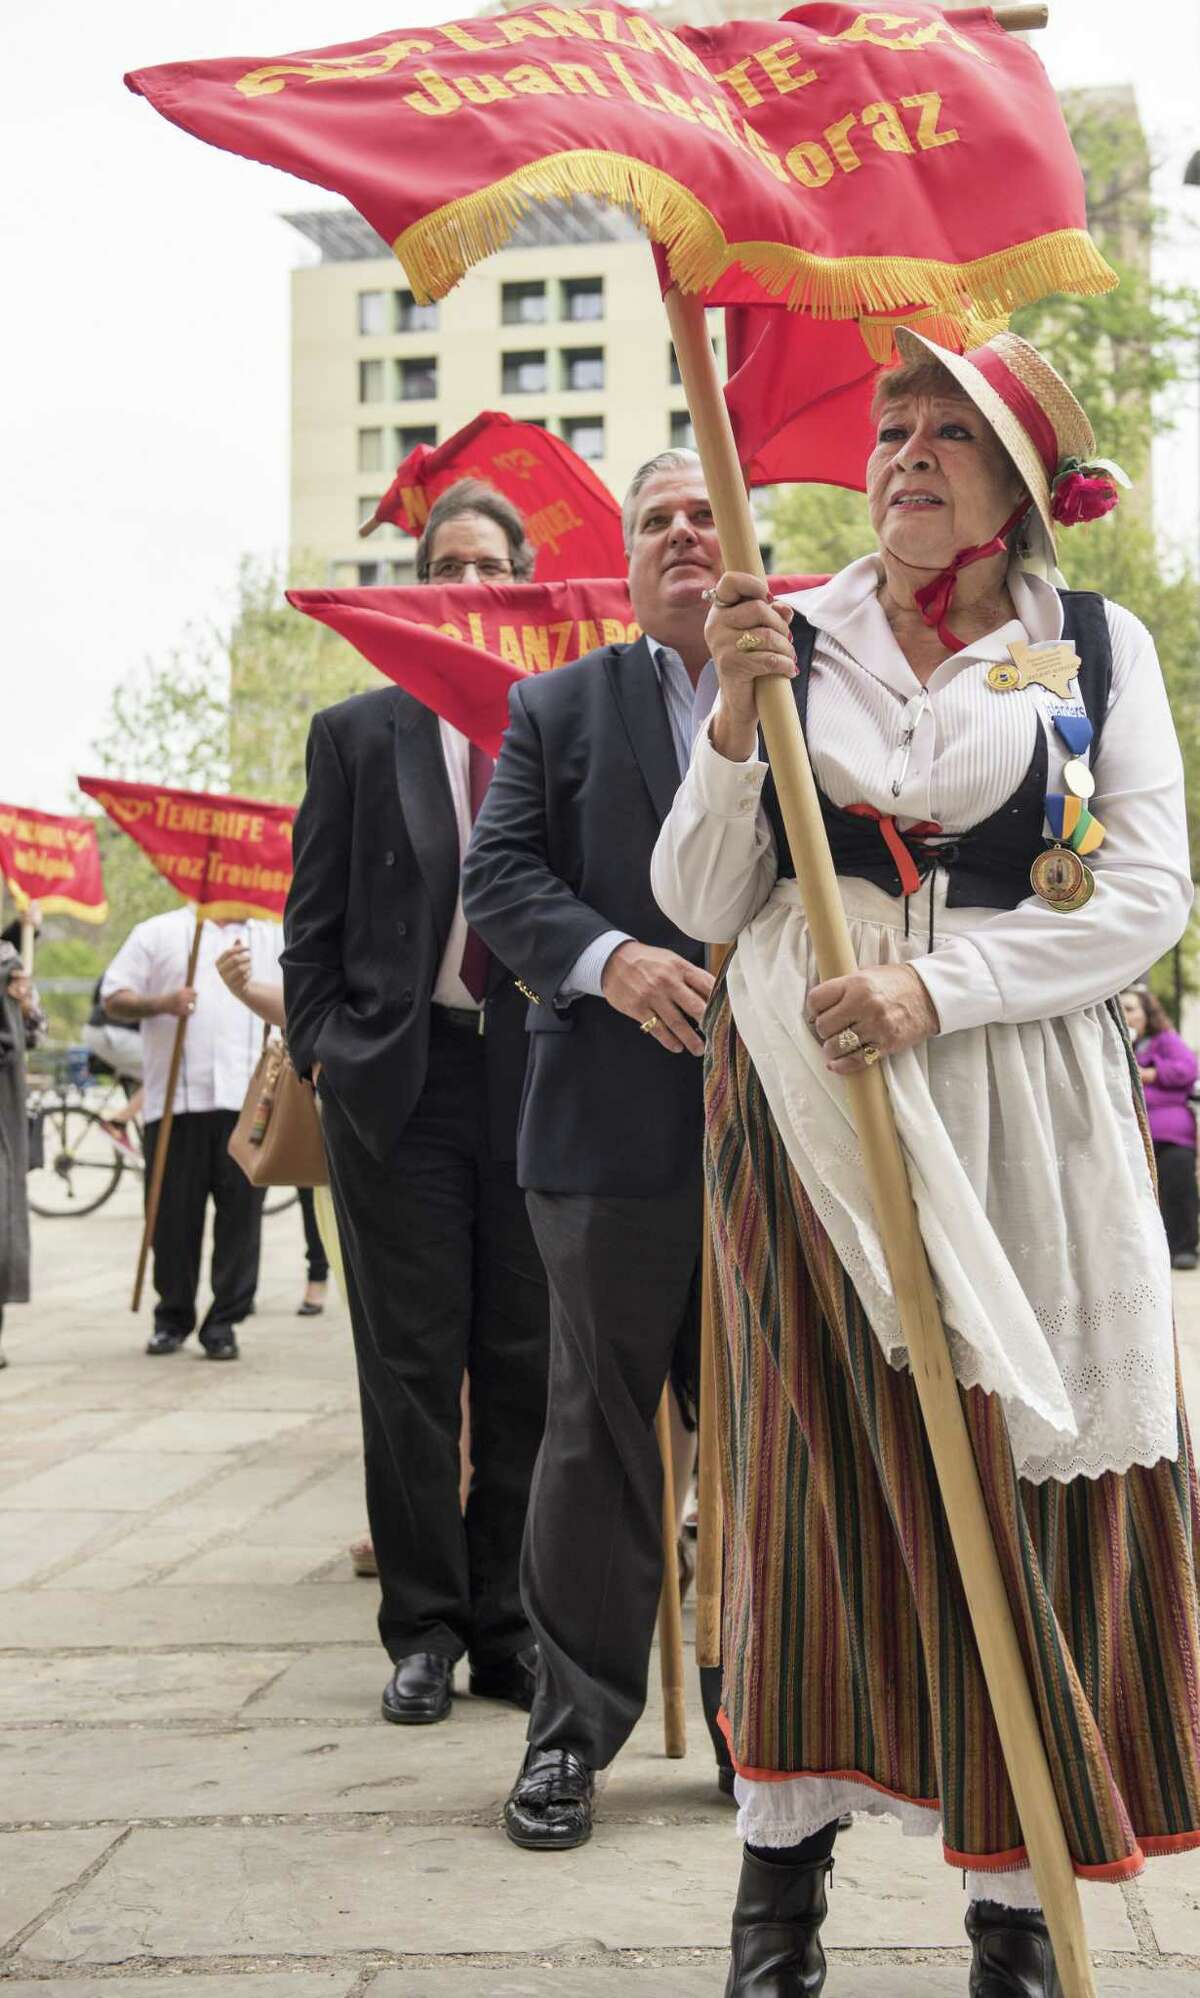 Alicia Calderon a member of Canary Islands Descendants Association commemorates the arrival of their ancestors in San Antonio on Sunday, March 12, 2017, at San Fernando Cathedral. Some members of the association dressed in full historical attire and carry banners representing the original sixteen families who established the first civil government in San Antonio.